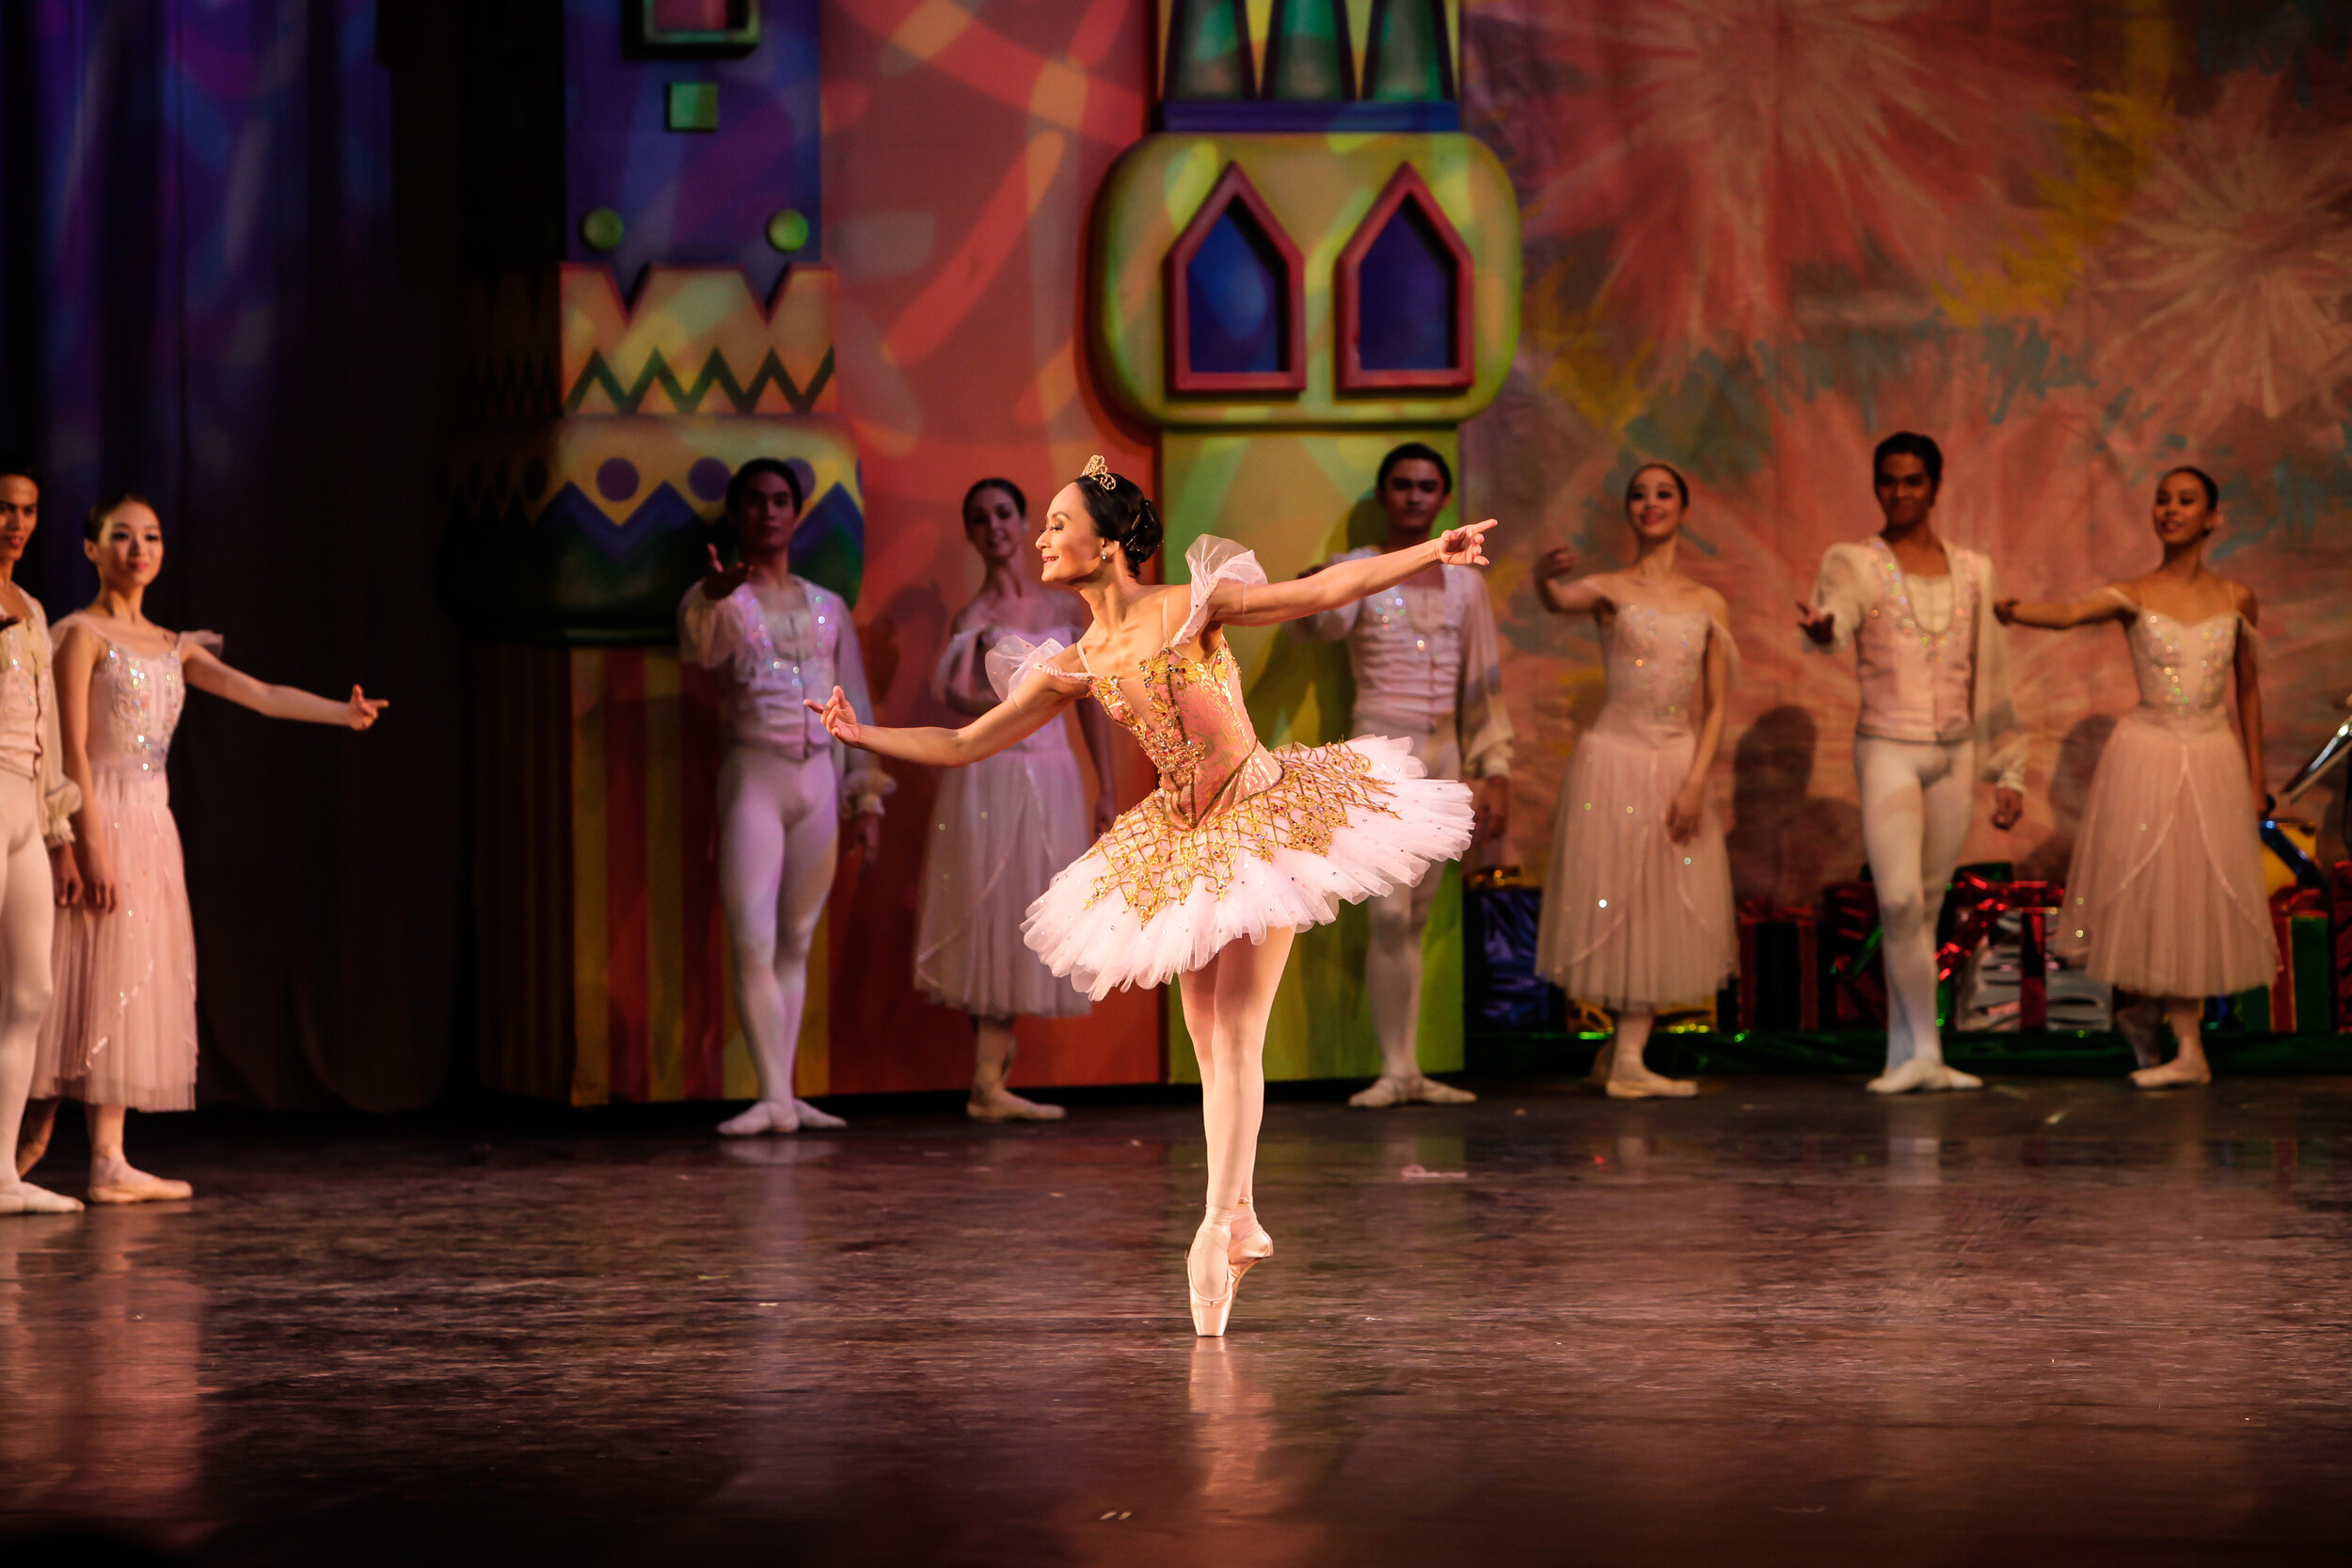    True to her role as the Sugar Plum Fairy in T he Nutcracker  (2013), Lisa Macuja-Elizalde wears a sumptuous confection of pink and gold studded with sparkling stones. The Sugar Plum Fairy is just one of the characters that give the popular Christm